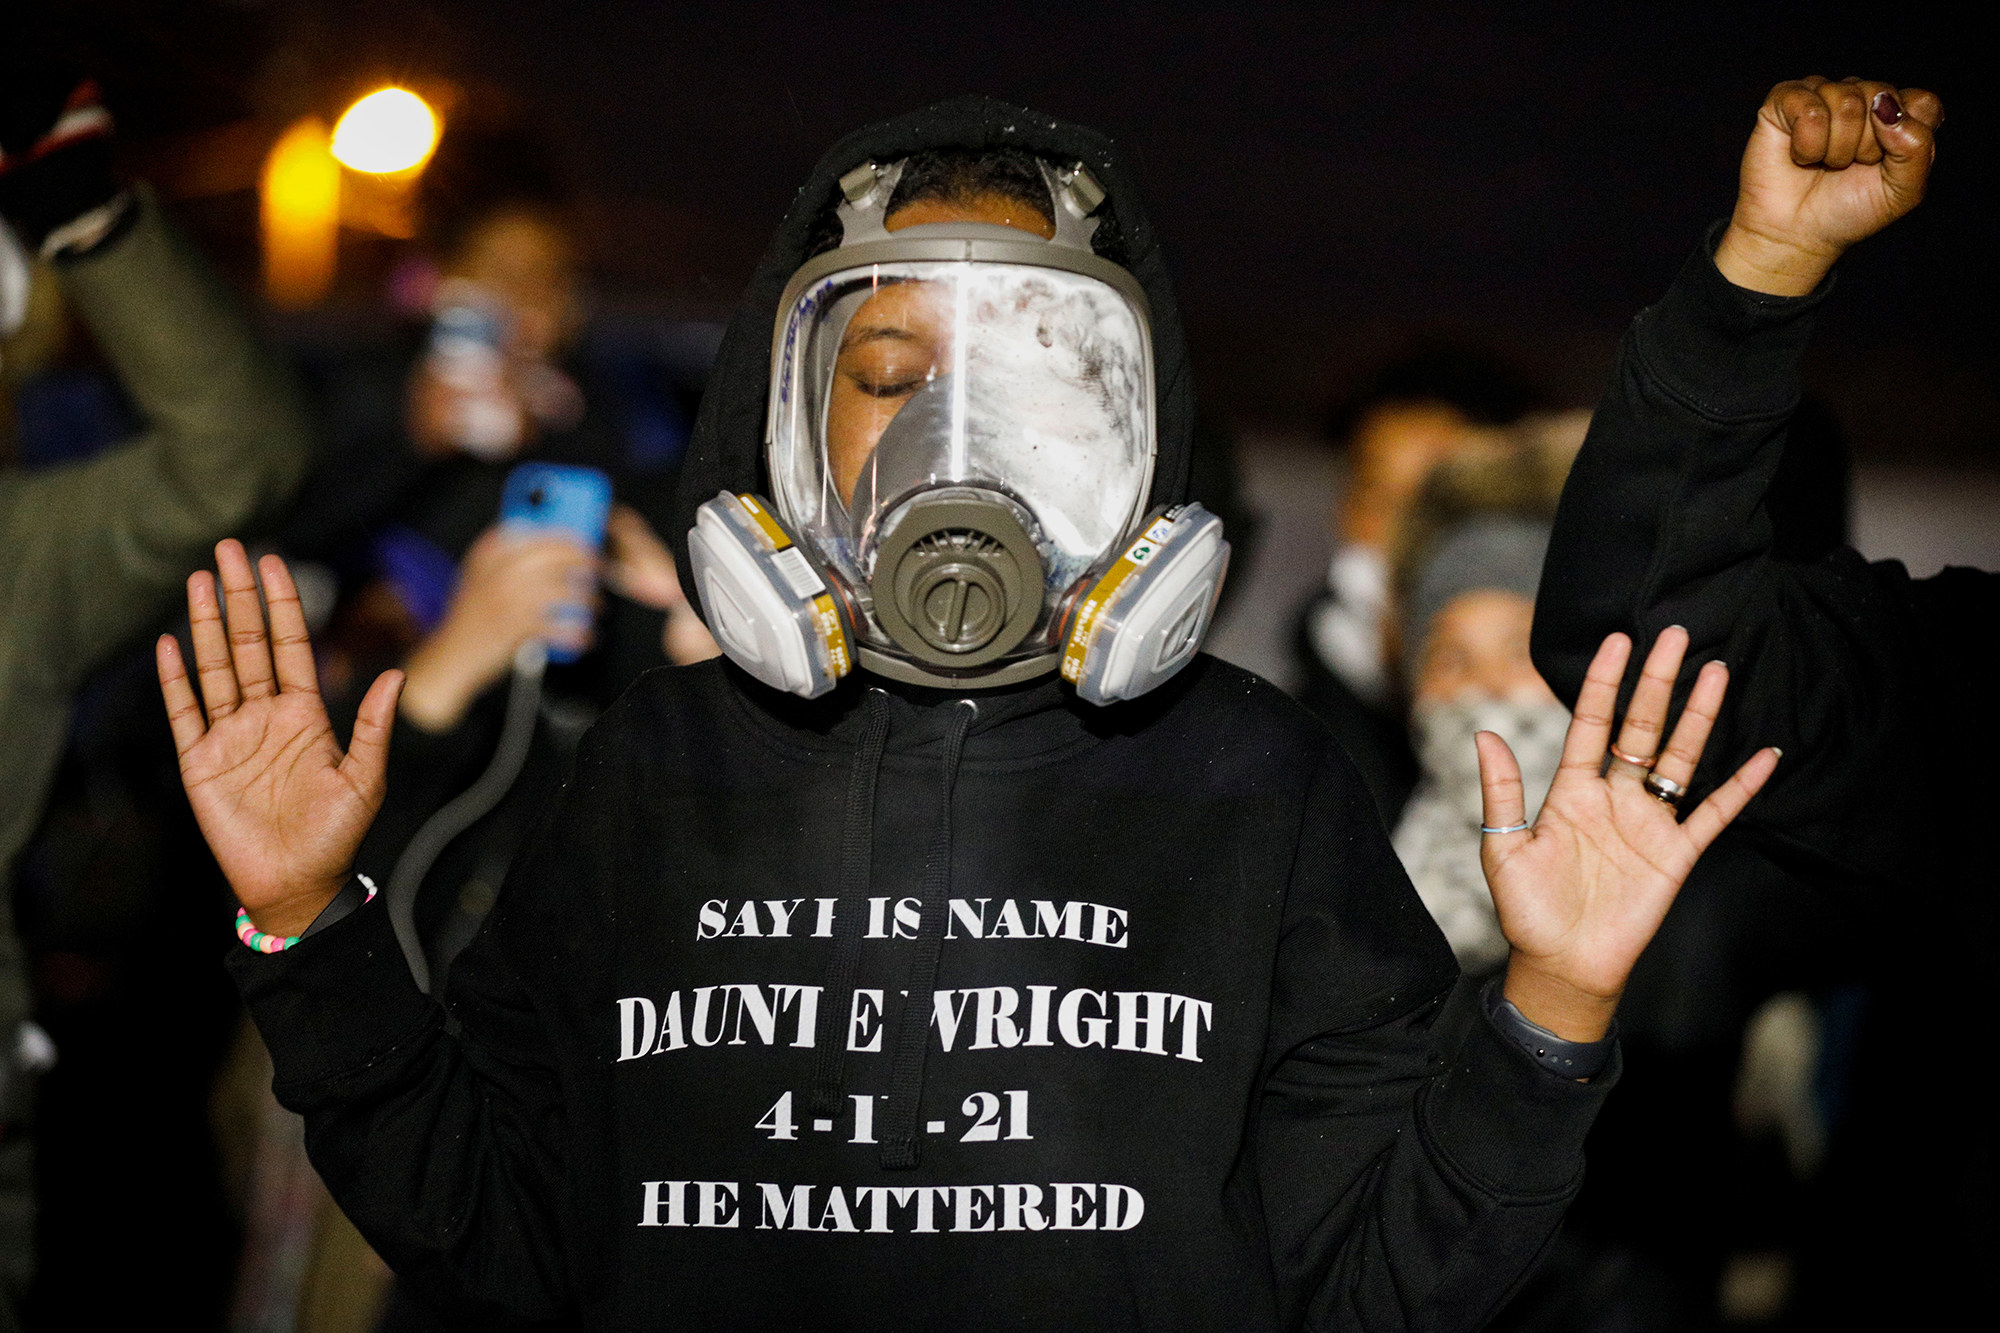 The protester&#x27;s sweatshirt says &quot;Say his name: Daunte Wright. 4-11-21. He mattered.&quot;